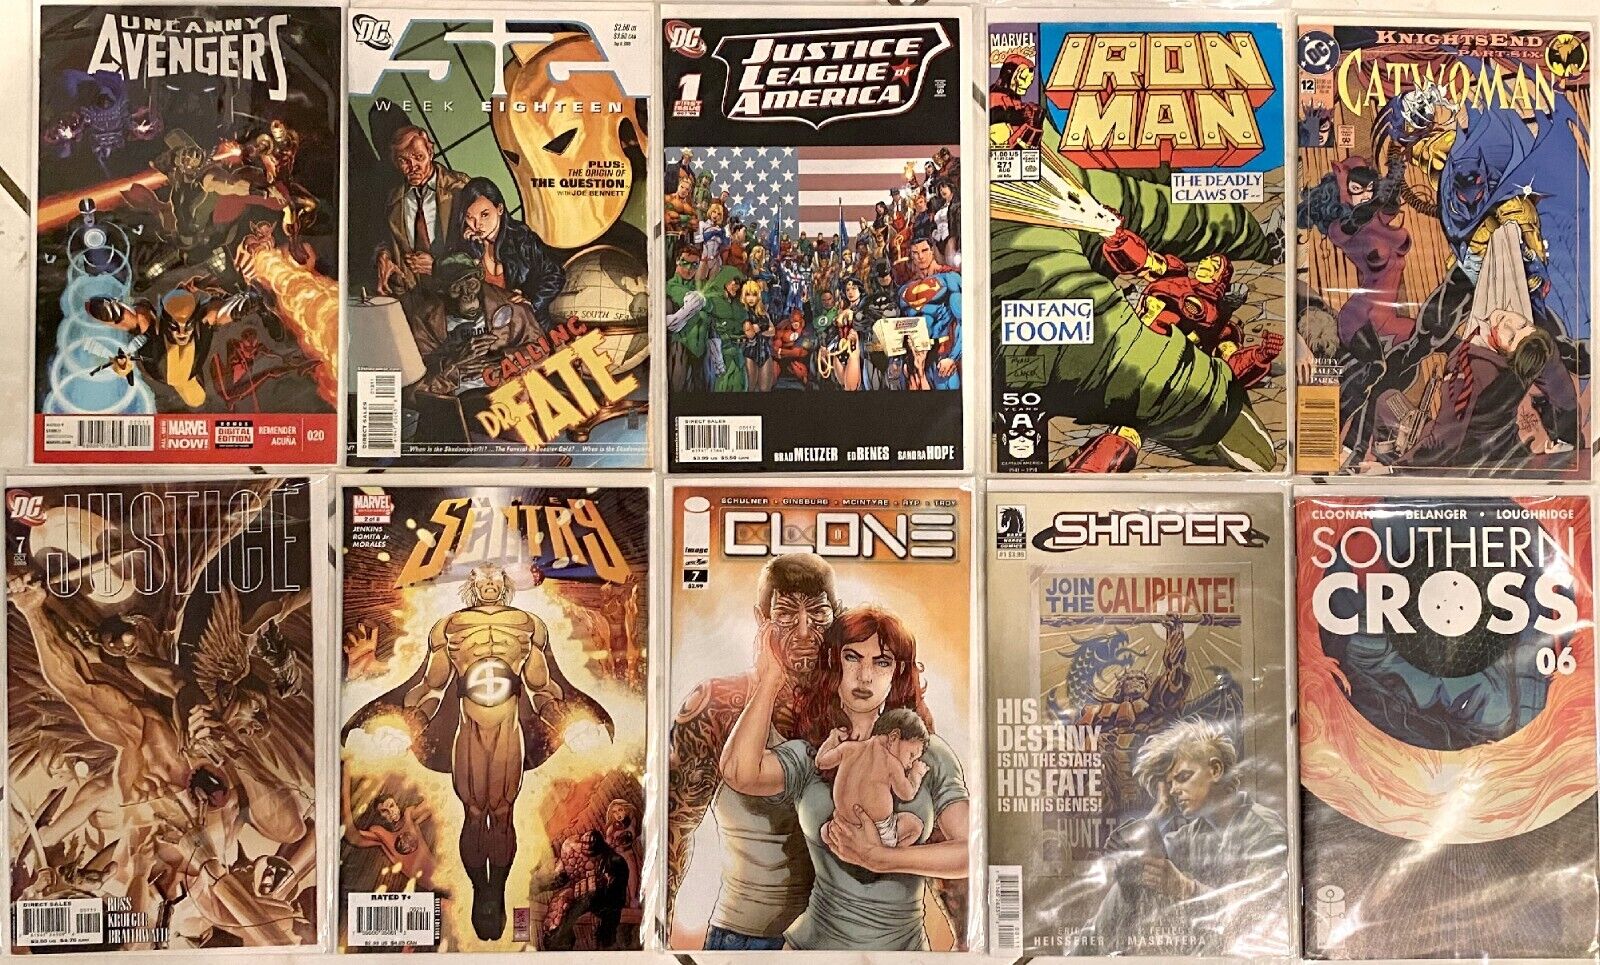 10 Comic Books Iron Man Catwoman Sentry Clone Justice Dr. Fate Avengers and more